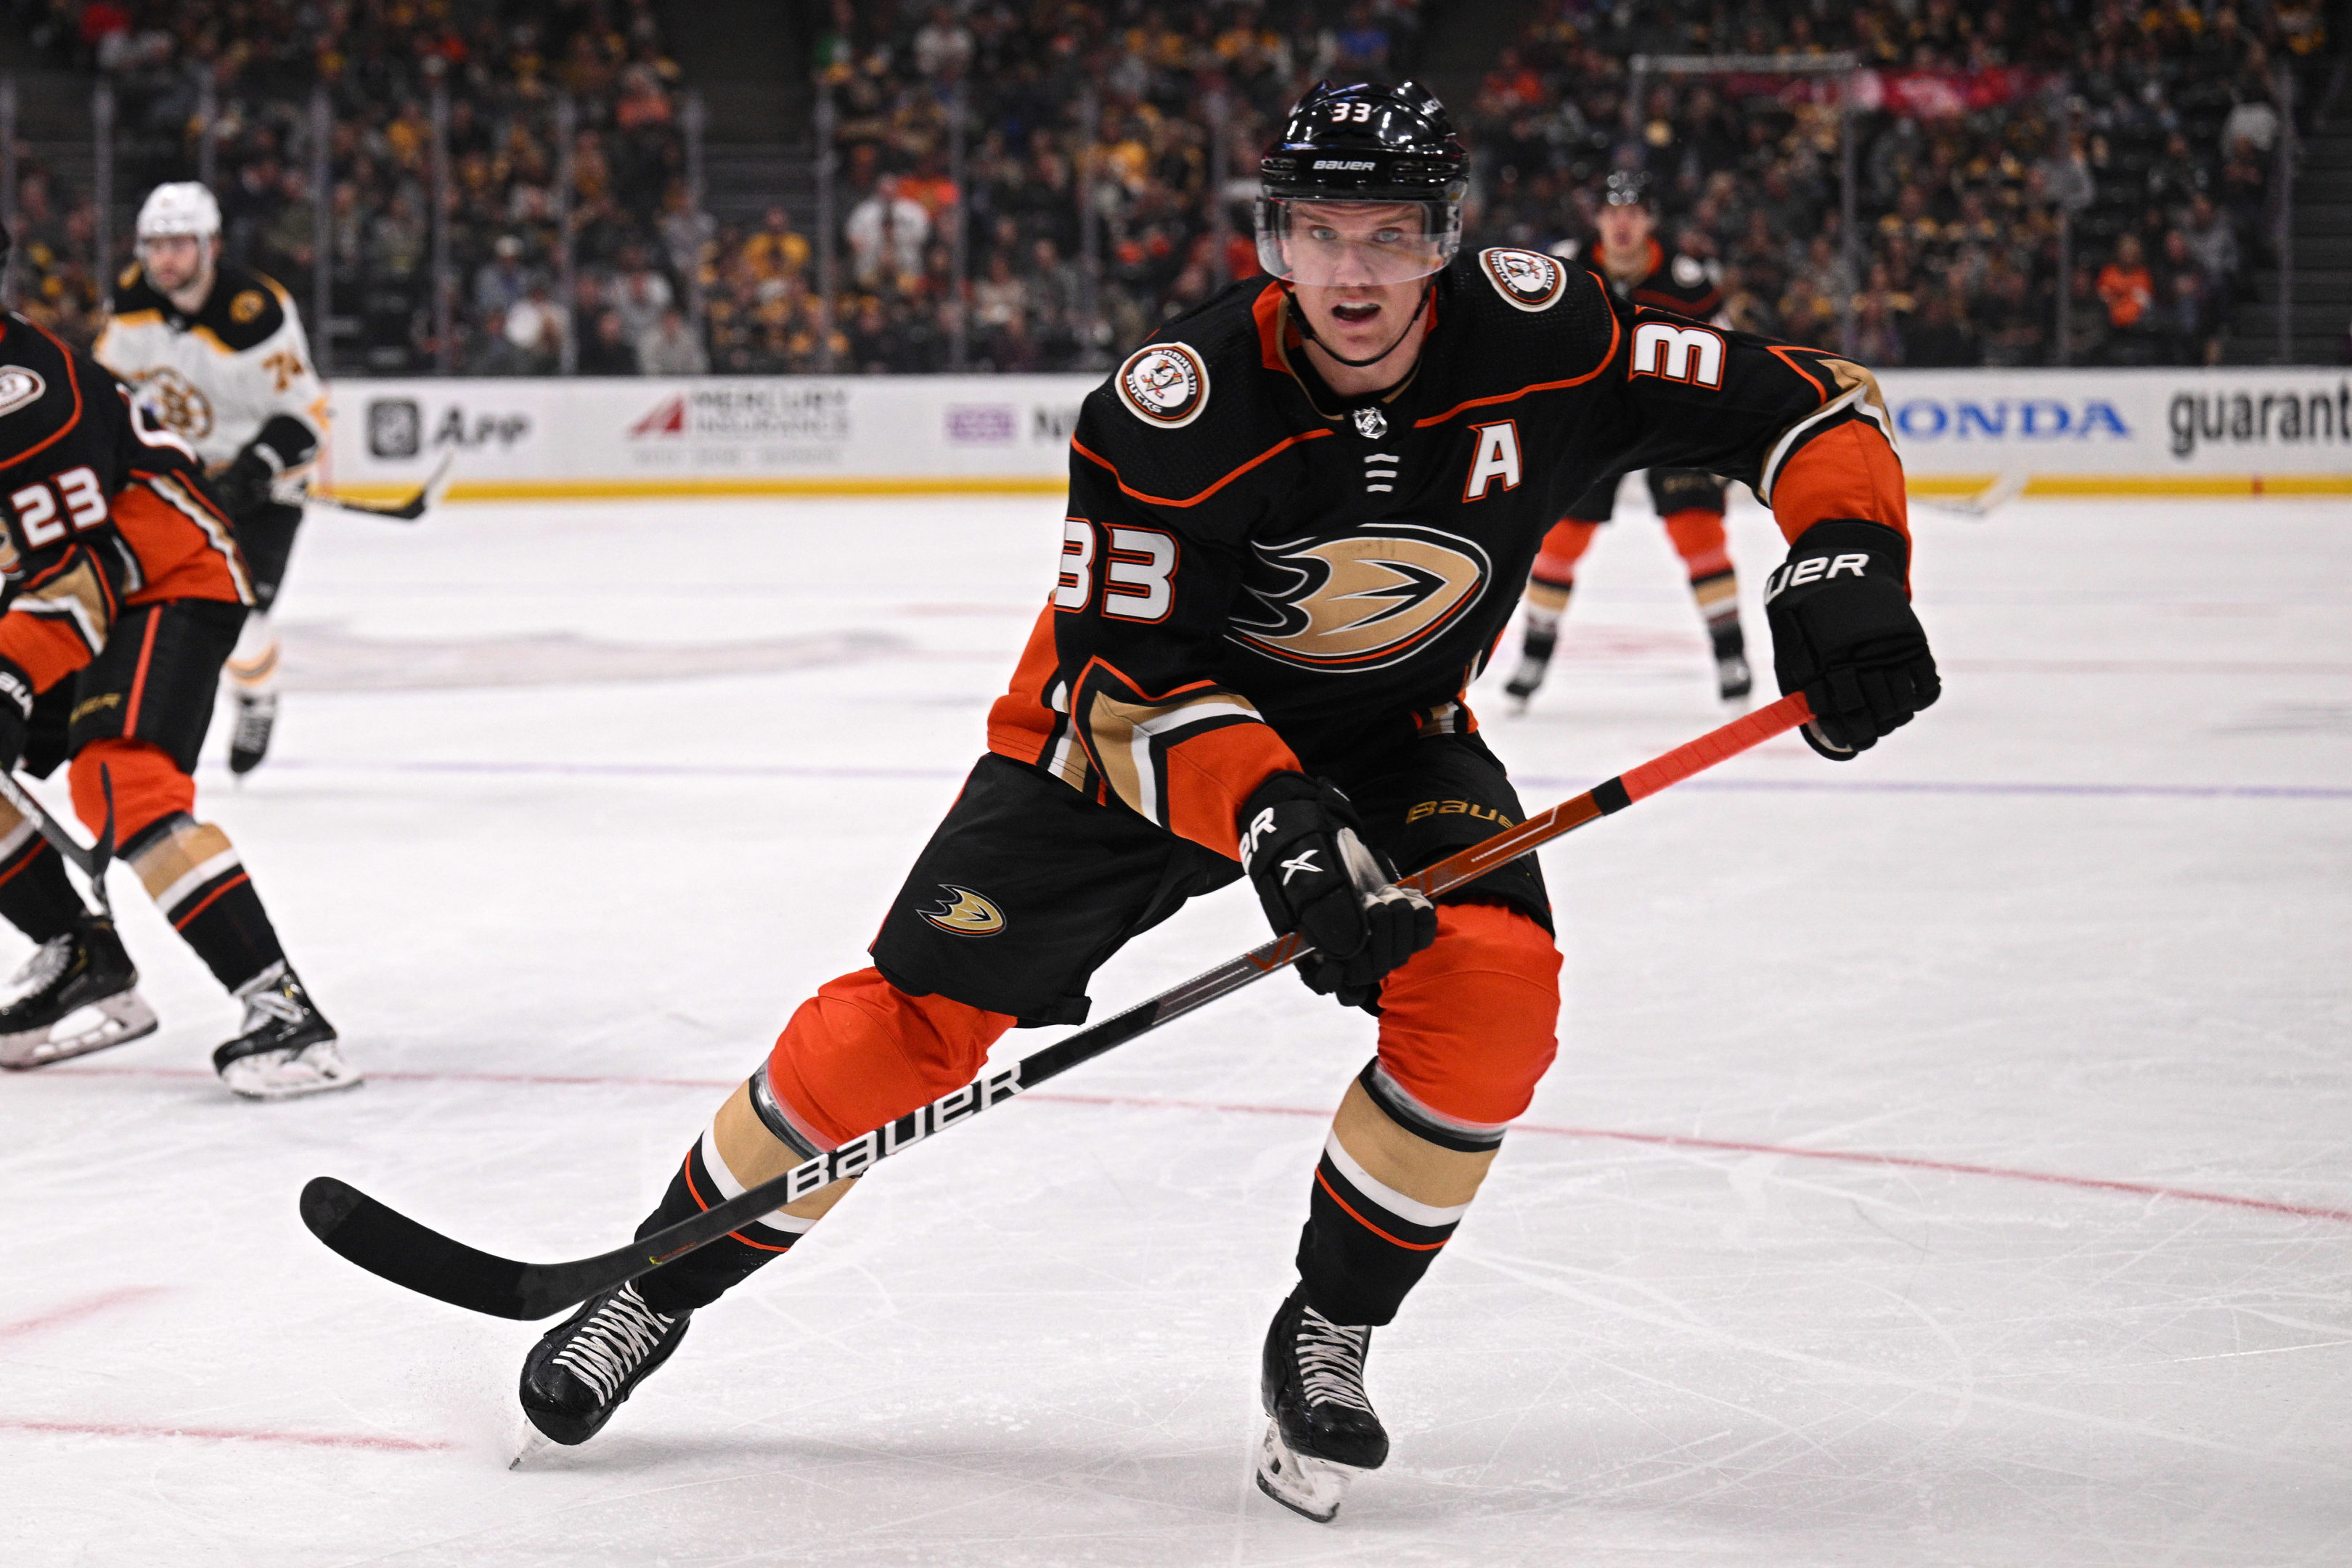 Ranking the top 10 Anaheim Ducks players of all time